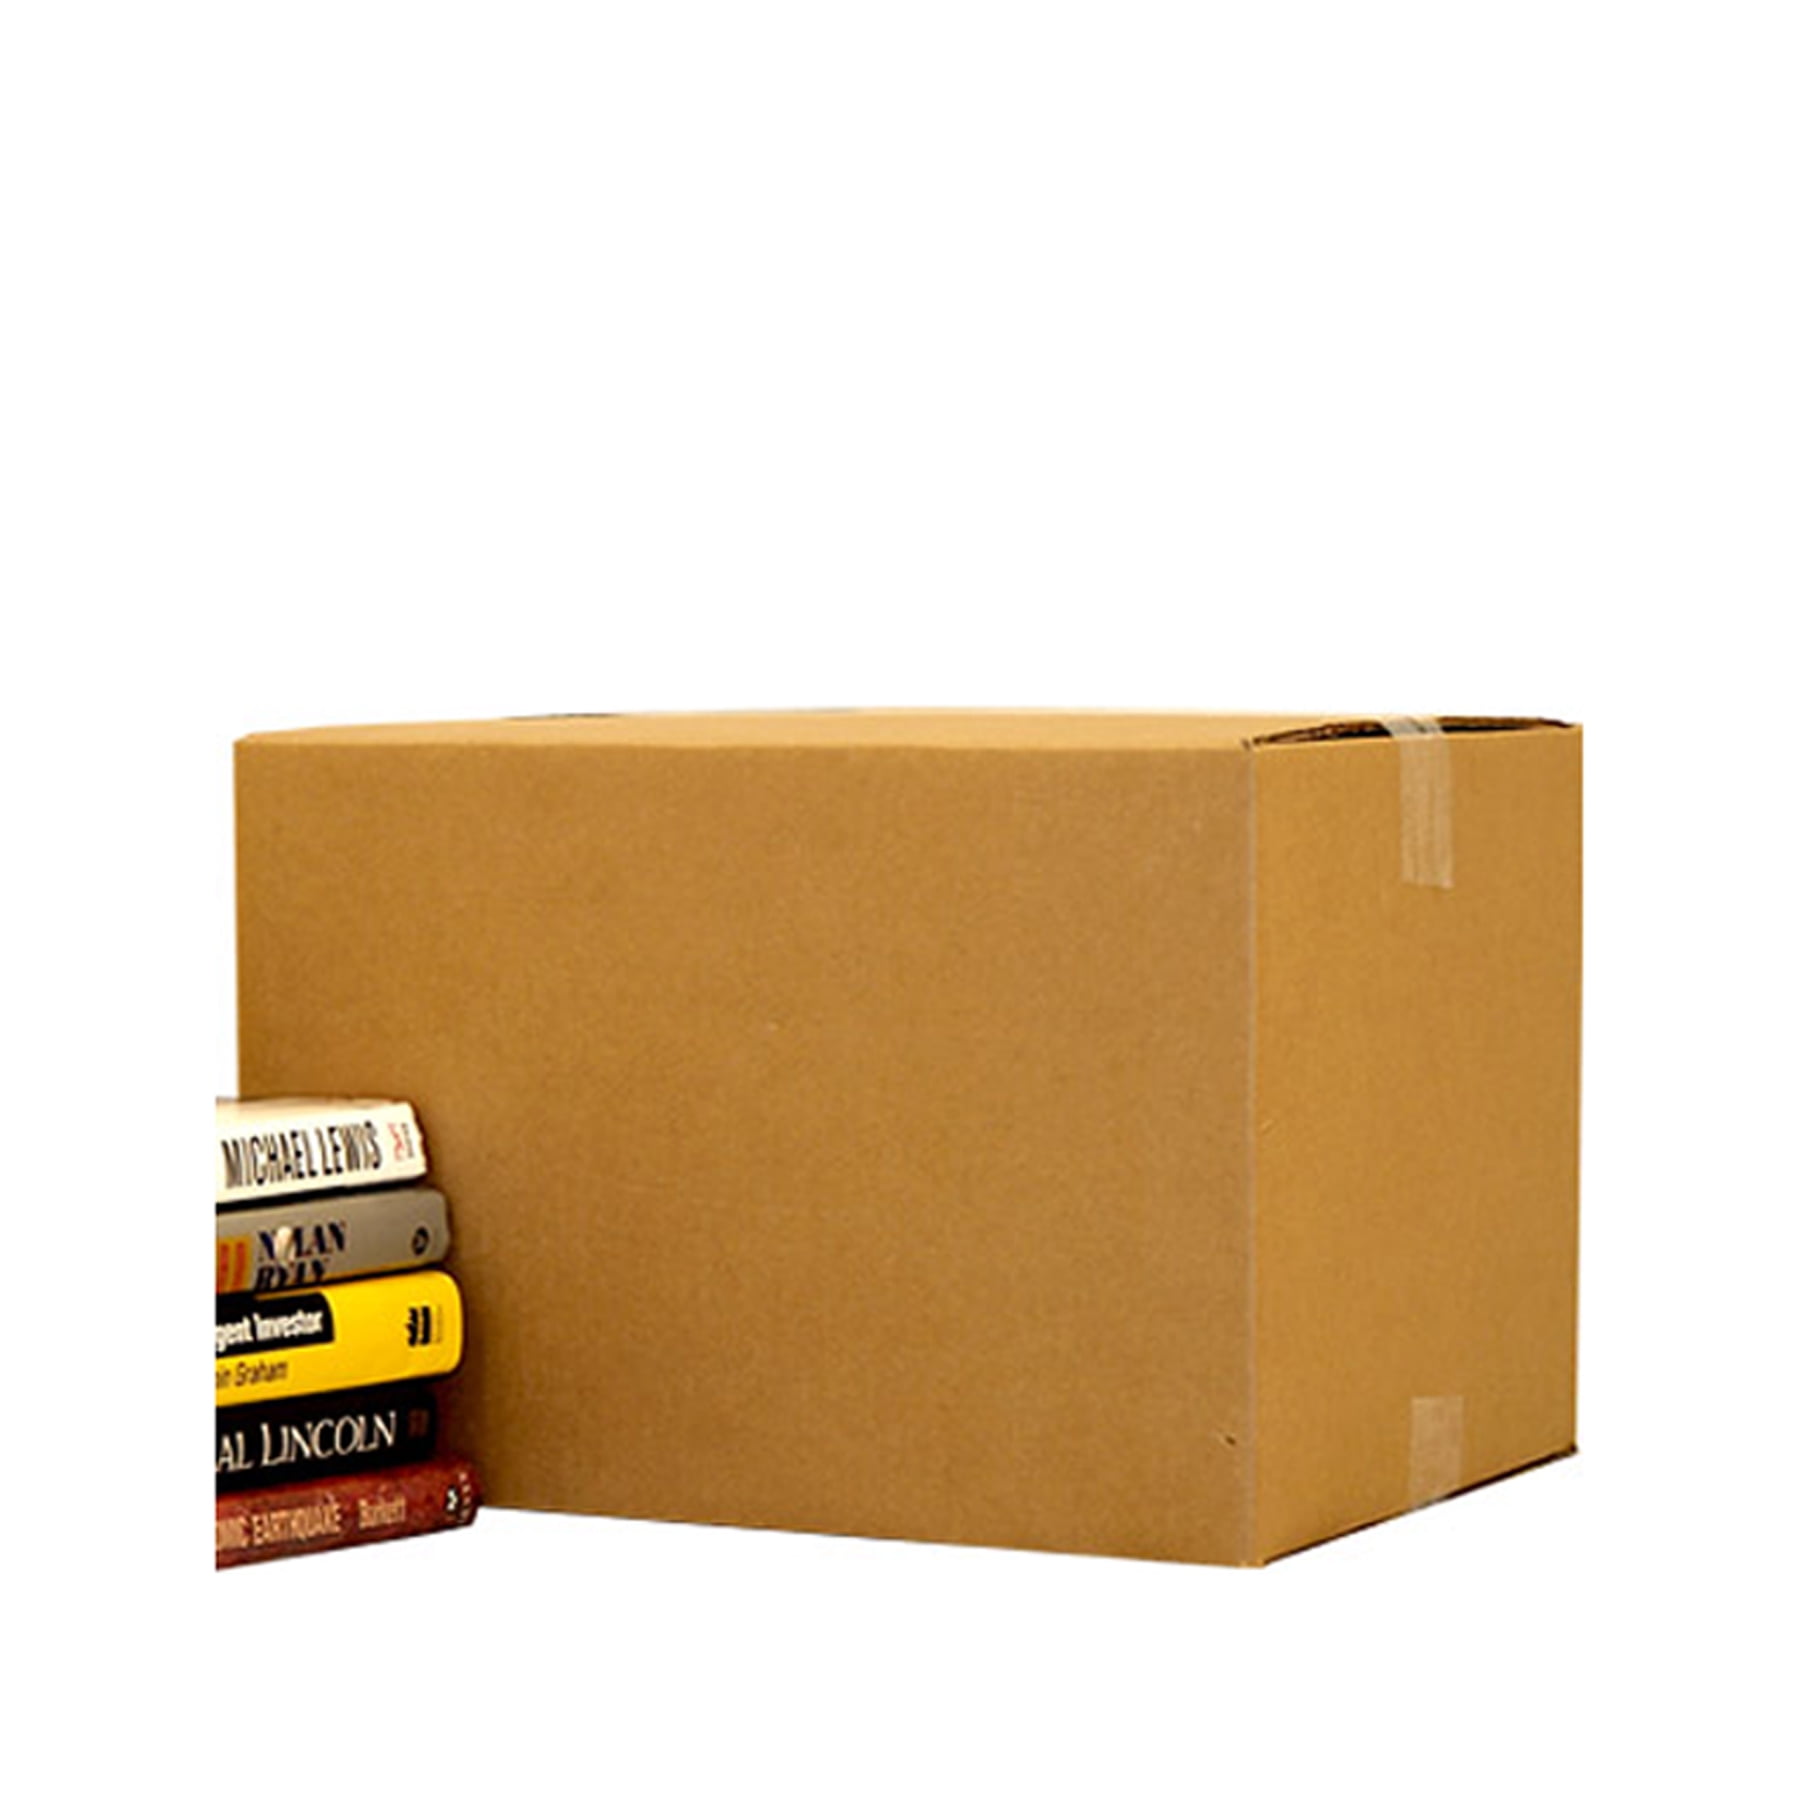 uBoxes Extra Large (Pack of 10)